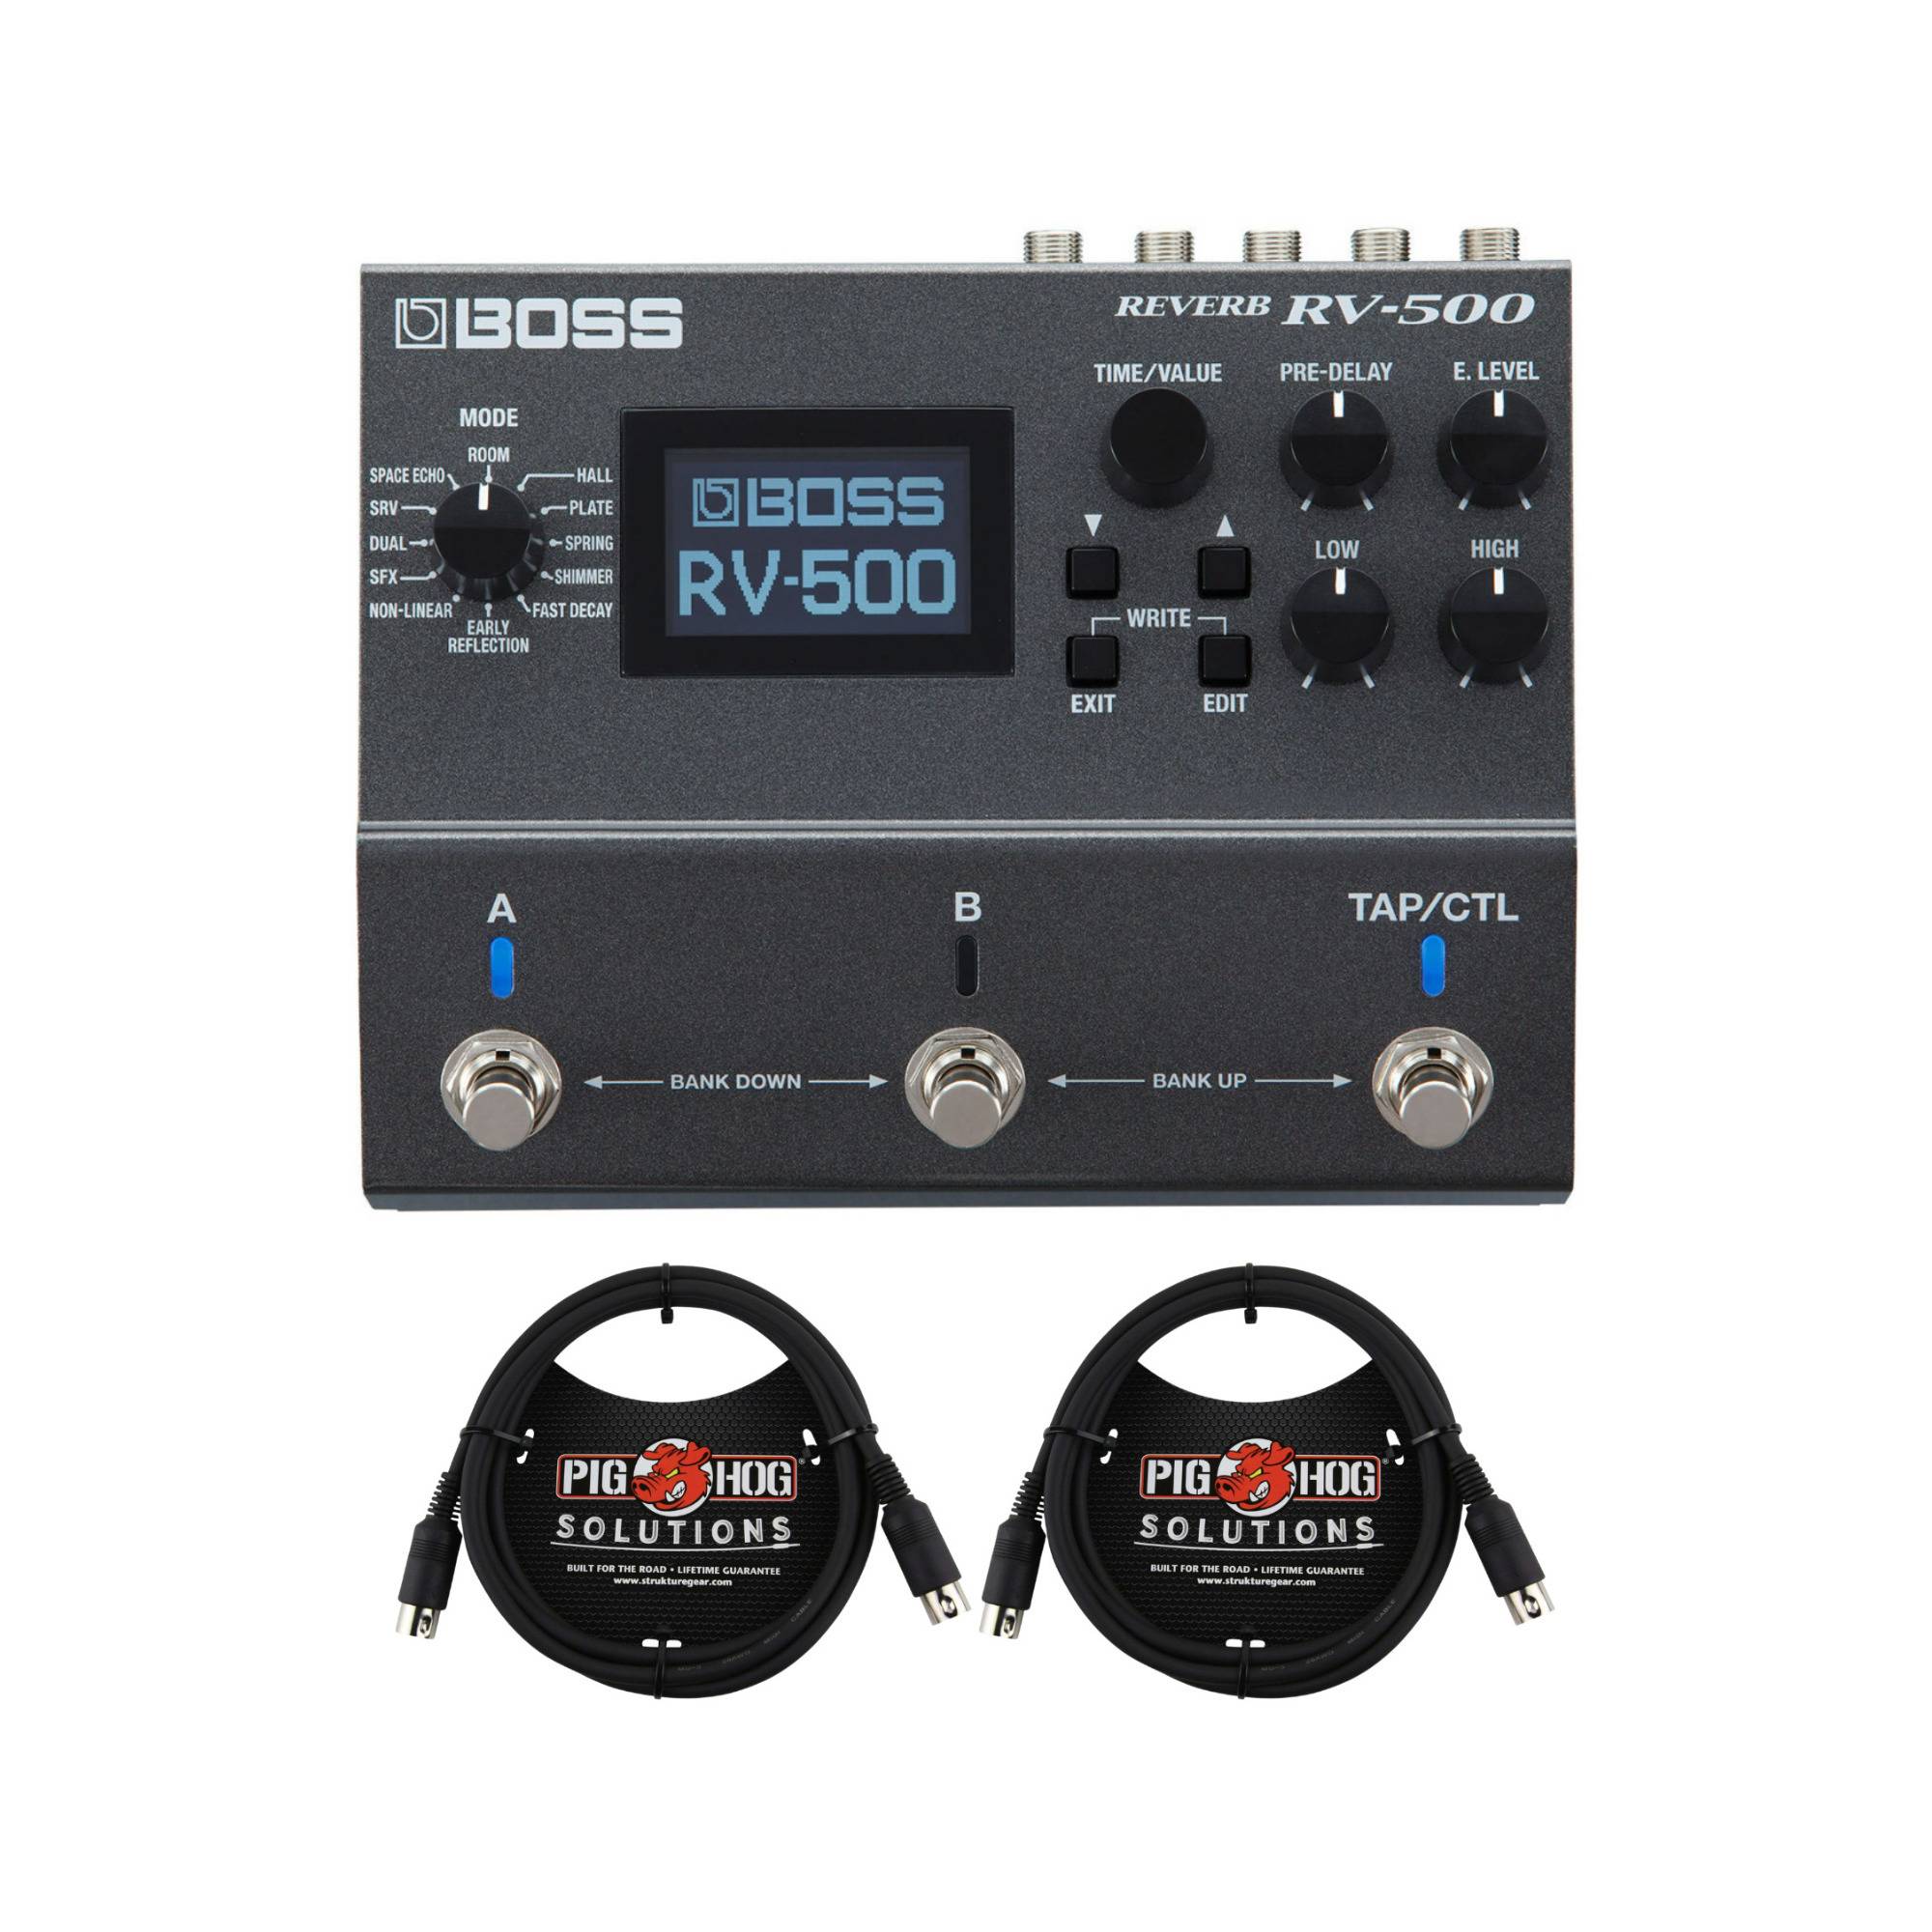 BOSS RV-500 Reverb Processor with 12 Modes, 21 Reverb Algorithm and High-Octane DSP w/Cable Bundle